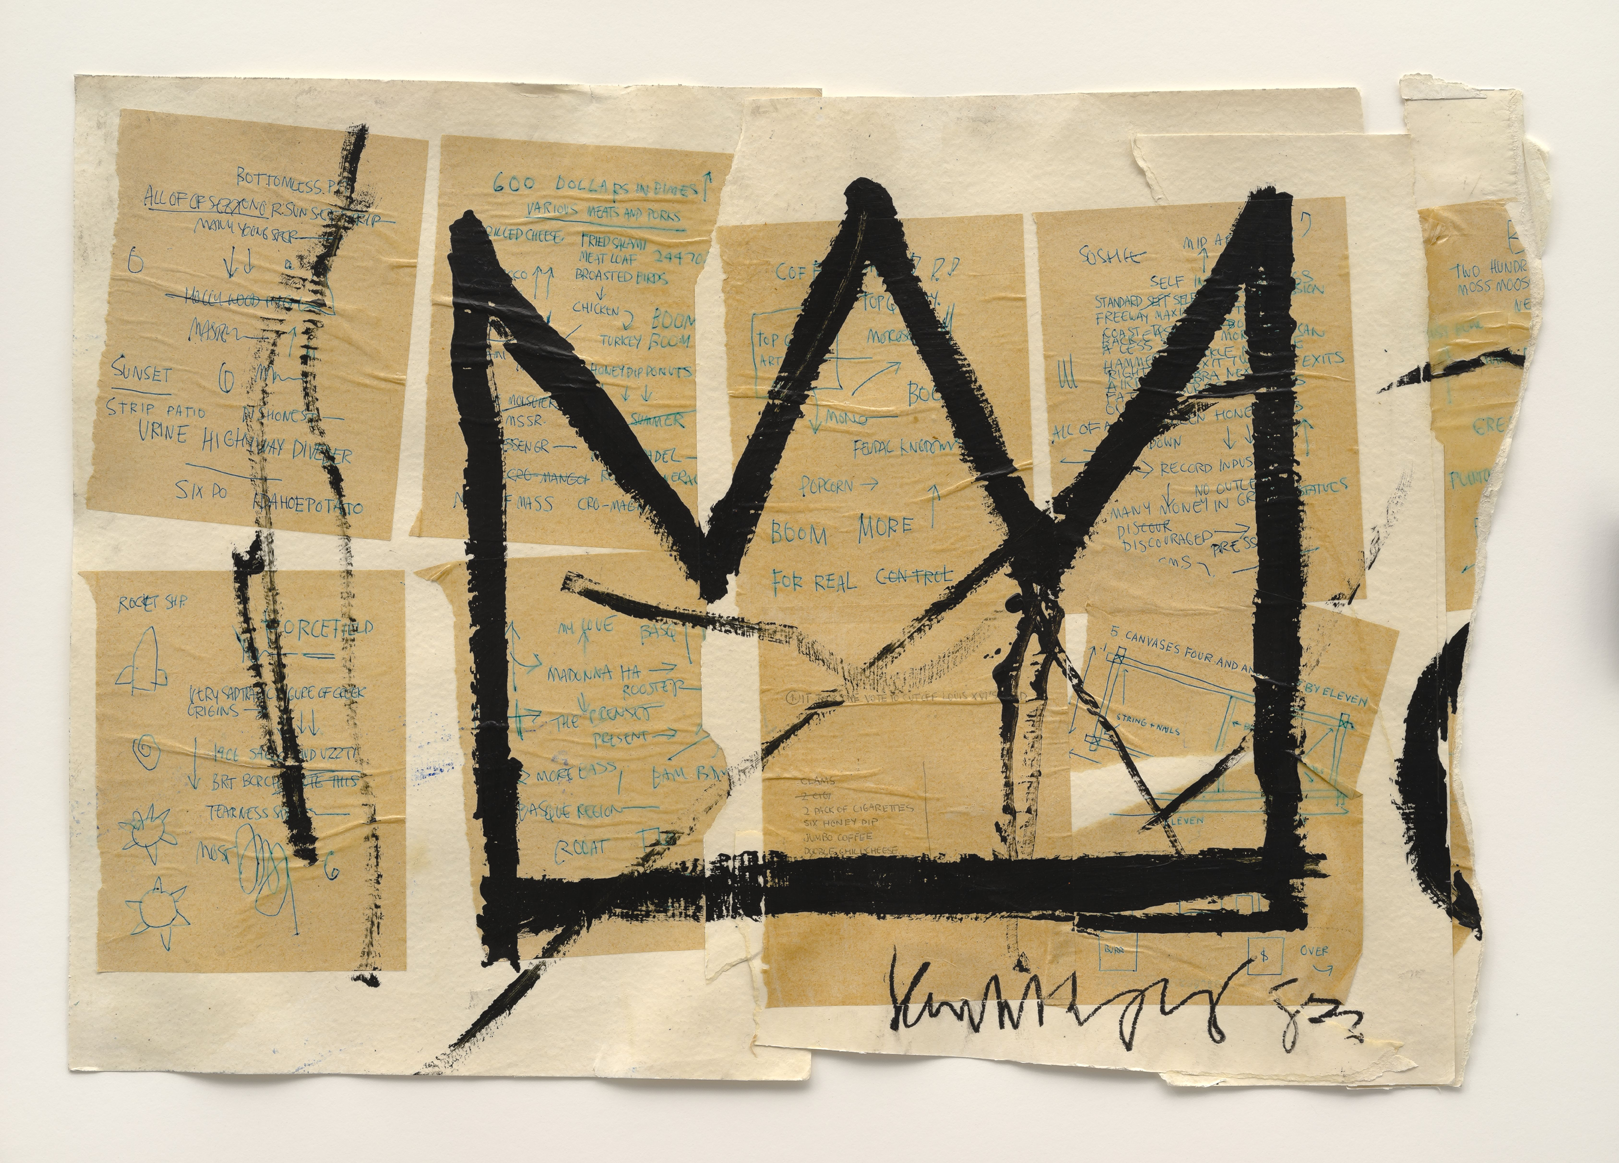 6. EL 135.58 Untitled (Crown), 1982. Jean-Michel Basquiat (American, 1960–1988). Acrylic, ink, and paper collage on paper; 20 x 29 in. Private collection, courtesy of Lio Malca. Copyright © Estate of Jean-Michel Basquiat, all rights reserved. Licensed by Artestar, New York. Photo: Mark-Woods.com